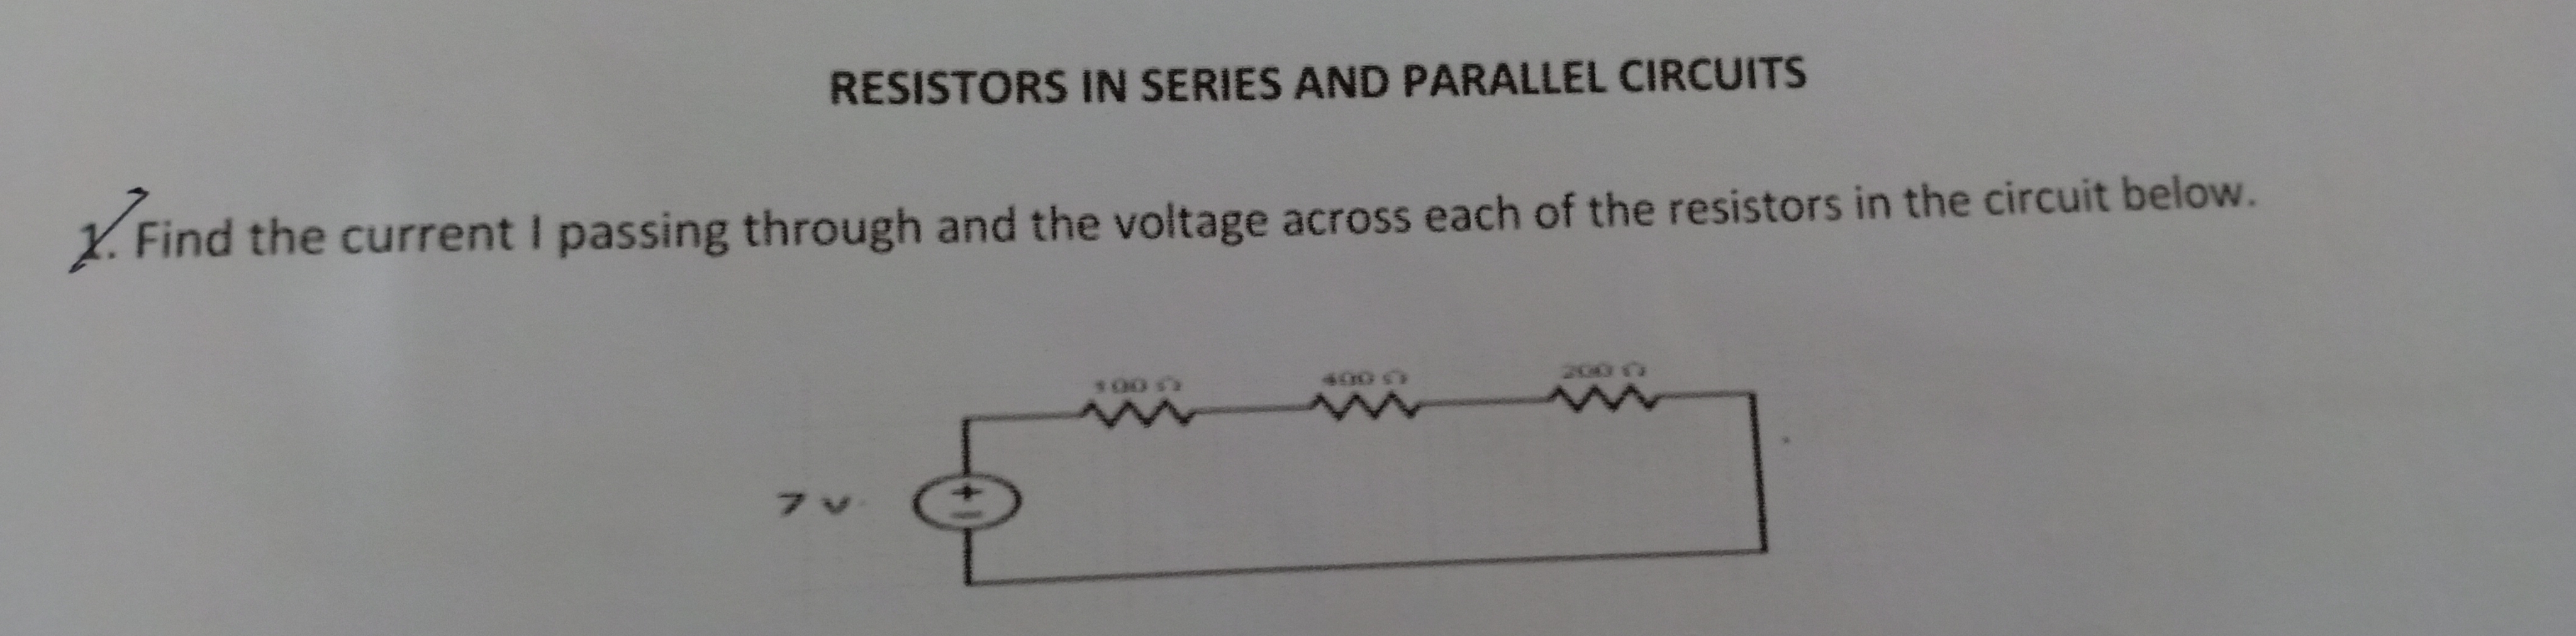 Find the current I passing through and the voltage across each of the resistors in the circuit below.
